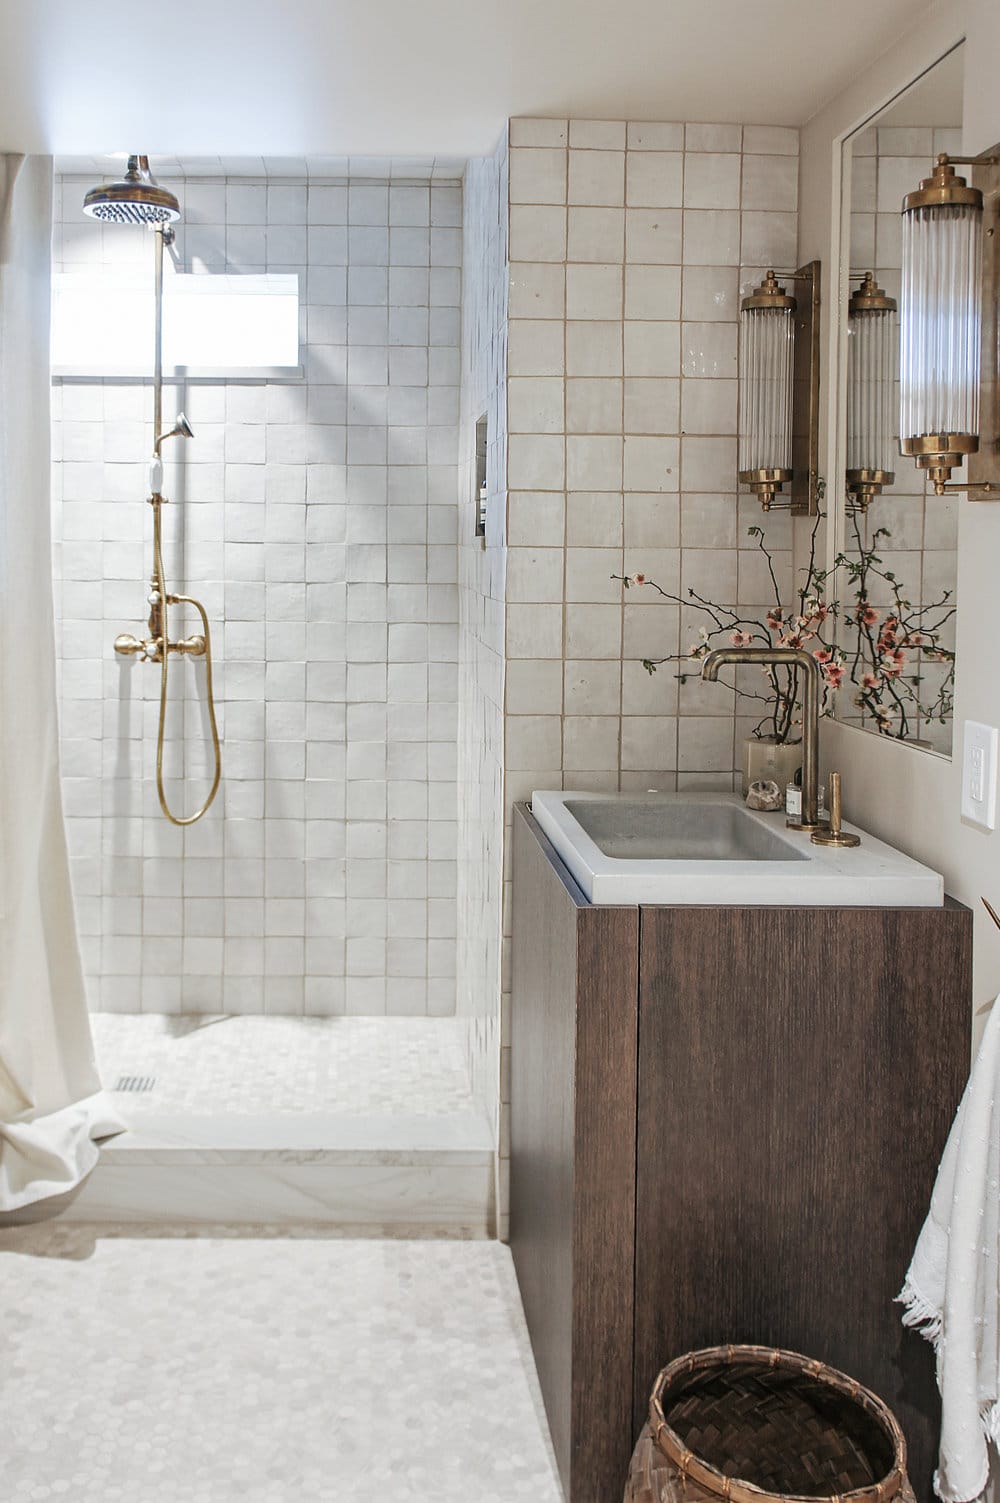 brass cream and wood tones in a small earthy bathroom remodel